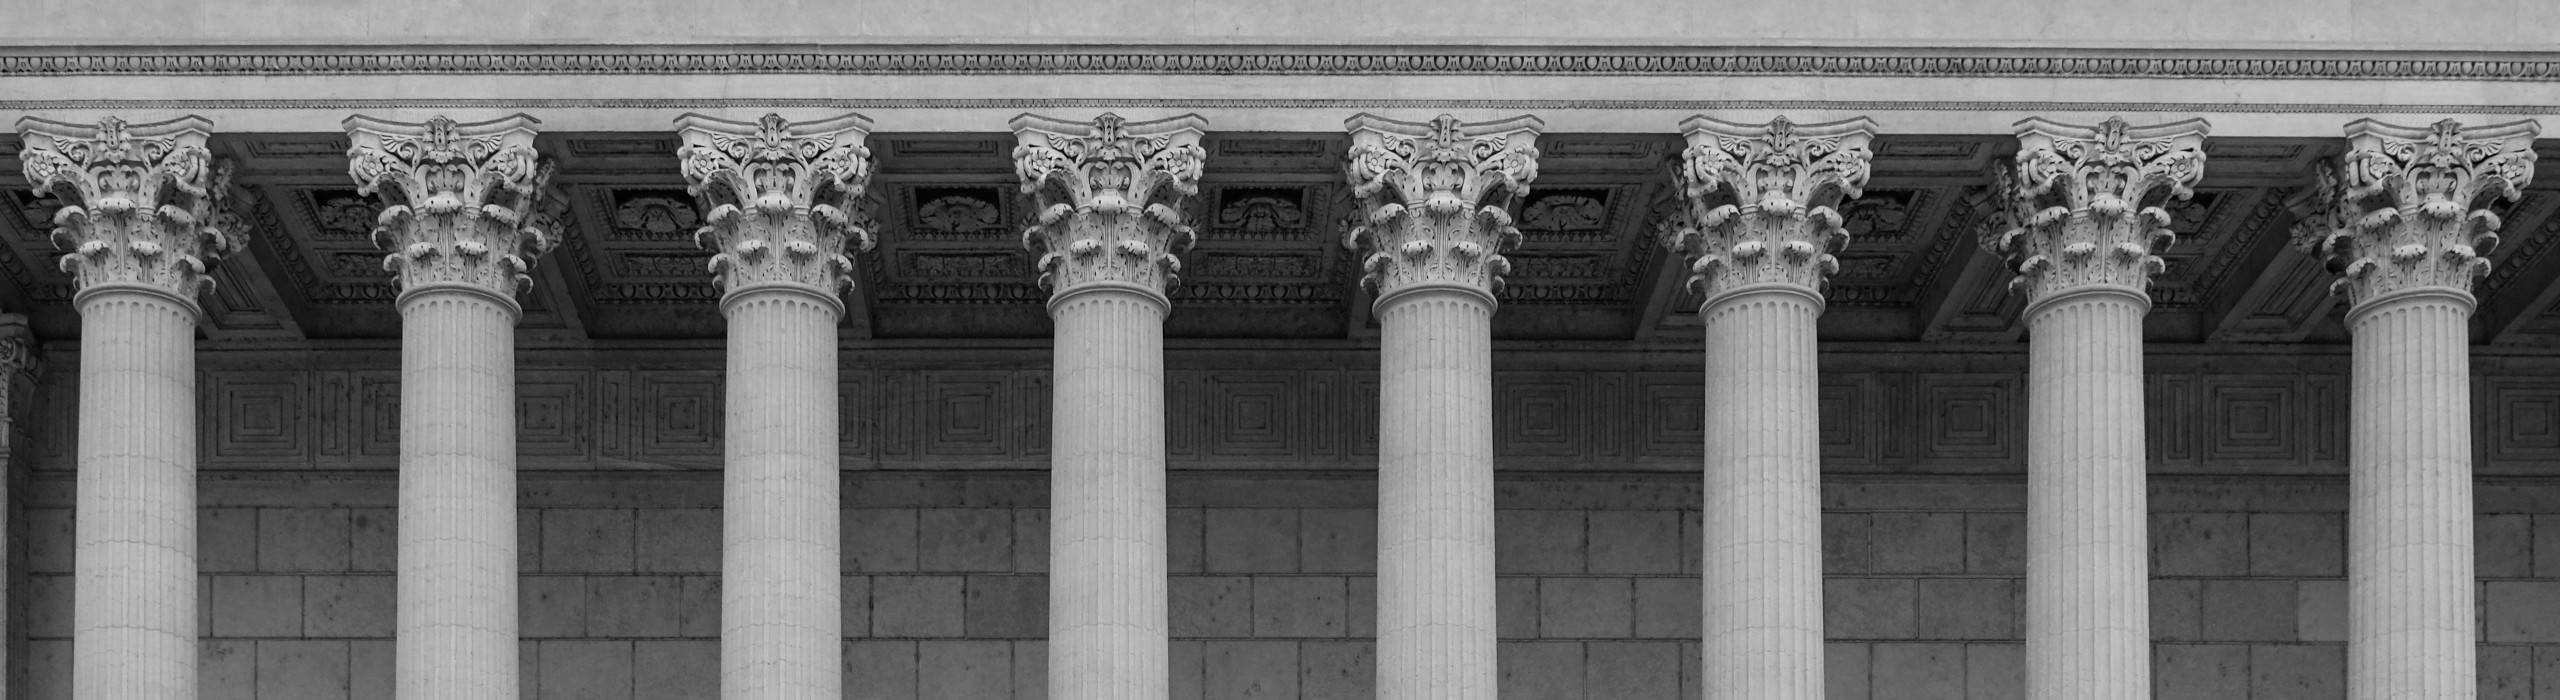 Farrell & Thurman, P.C. signature banner of courthouse pillars in black and white.